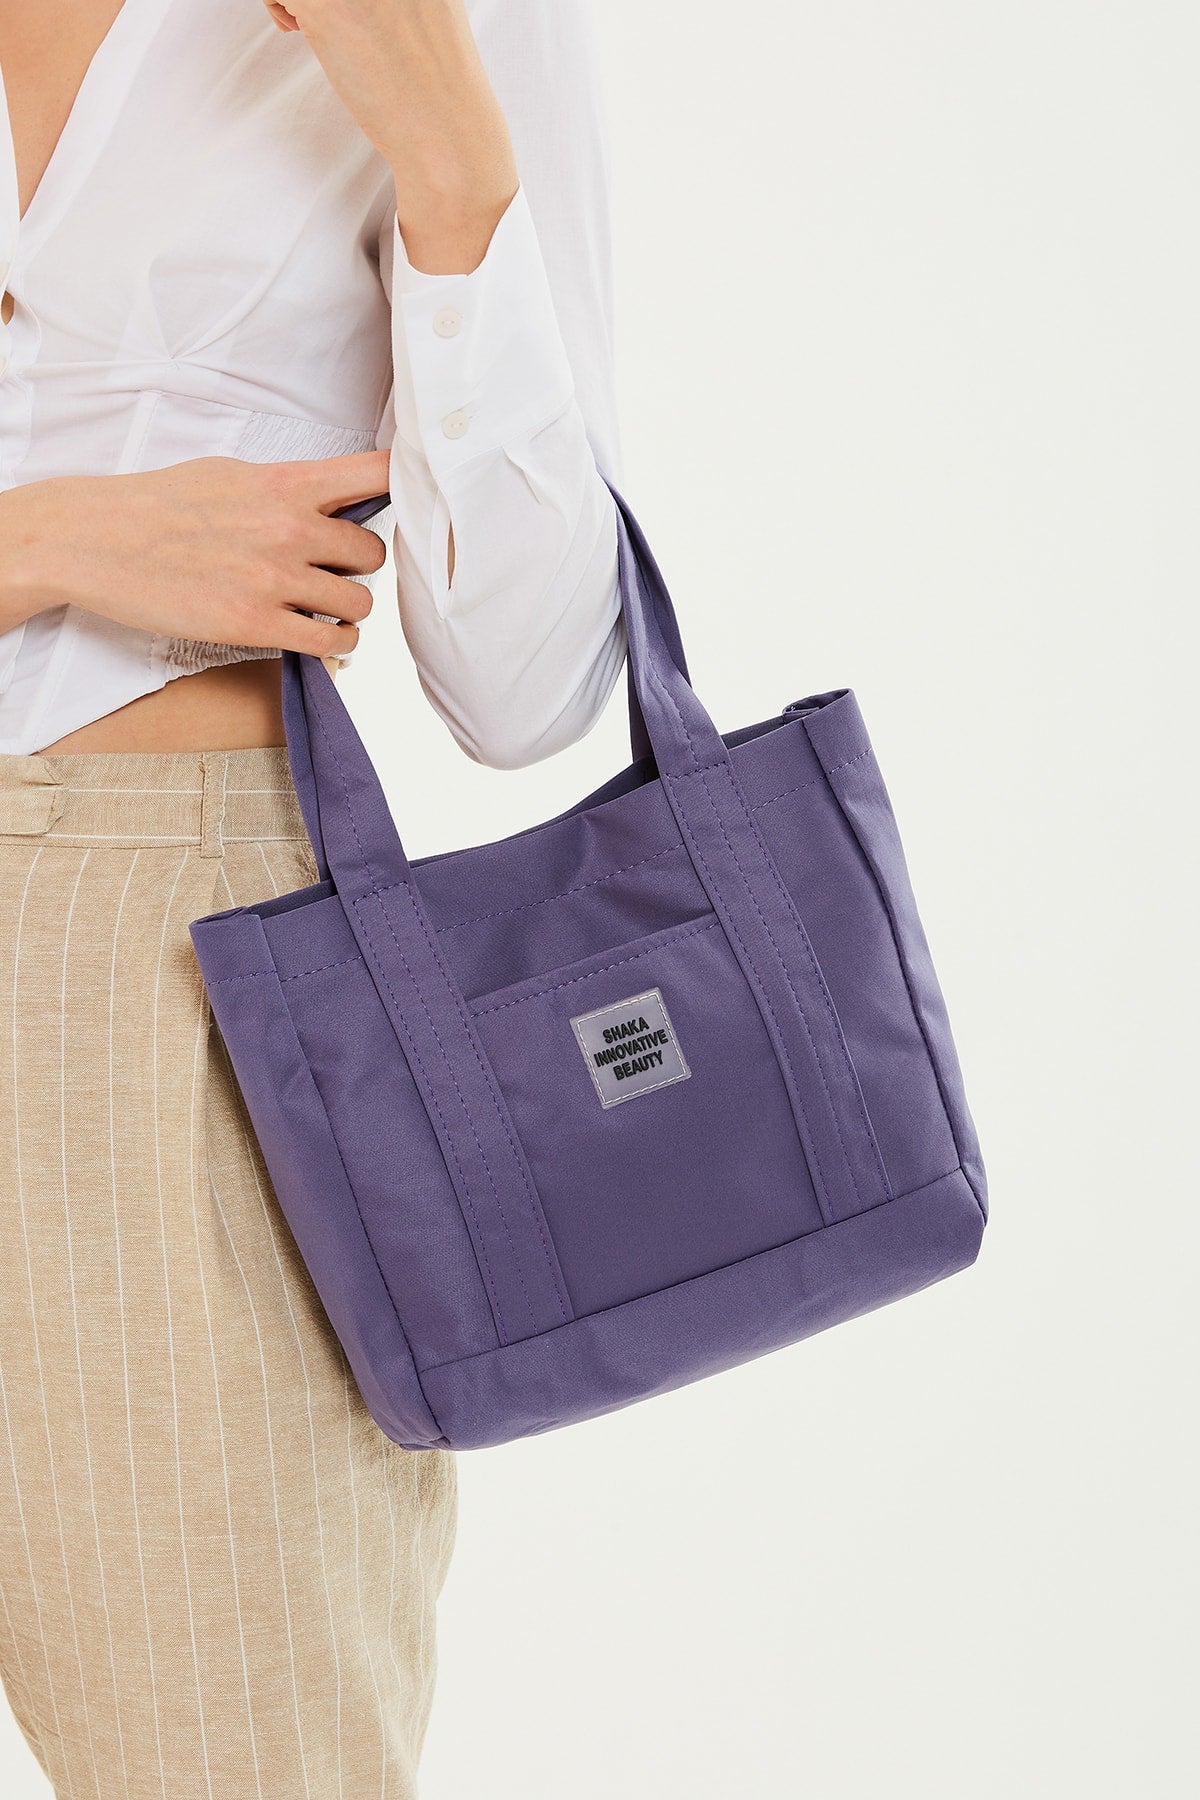 Lilac U37 Snap Closure 2 Compartment Front Pocket Detailed Canvas Fabric Casual Women's Arm And Shoulder Bag U: